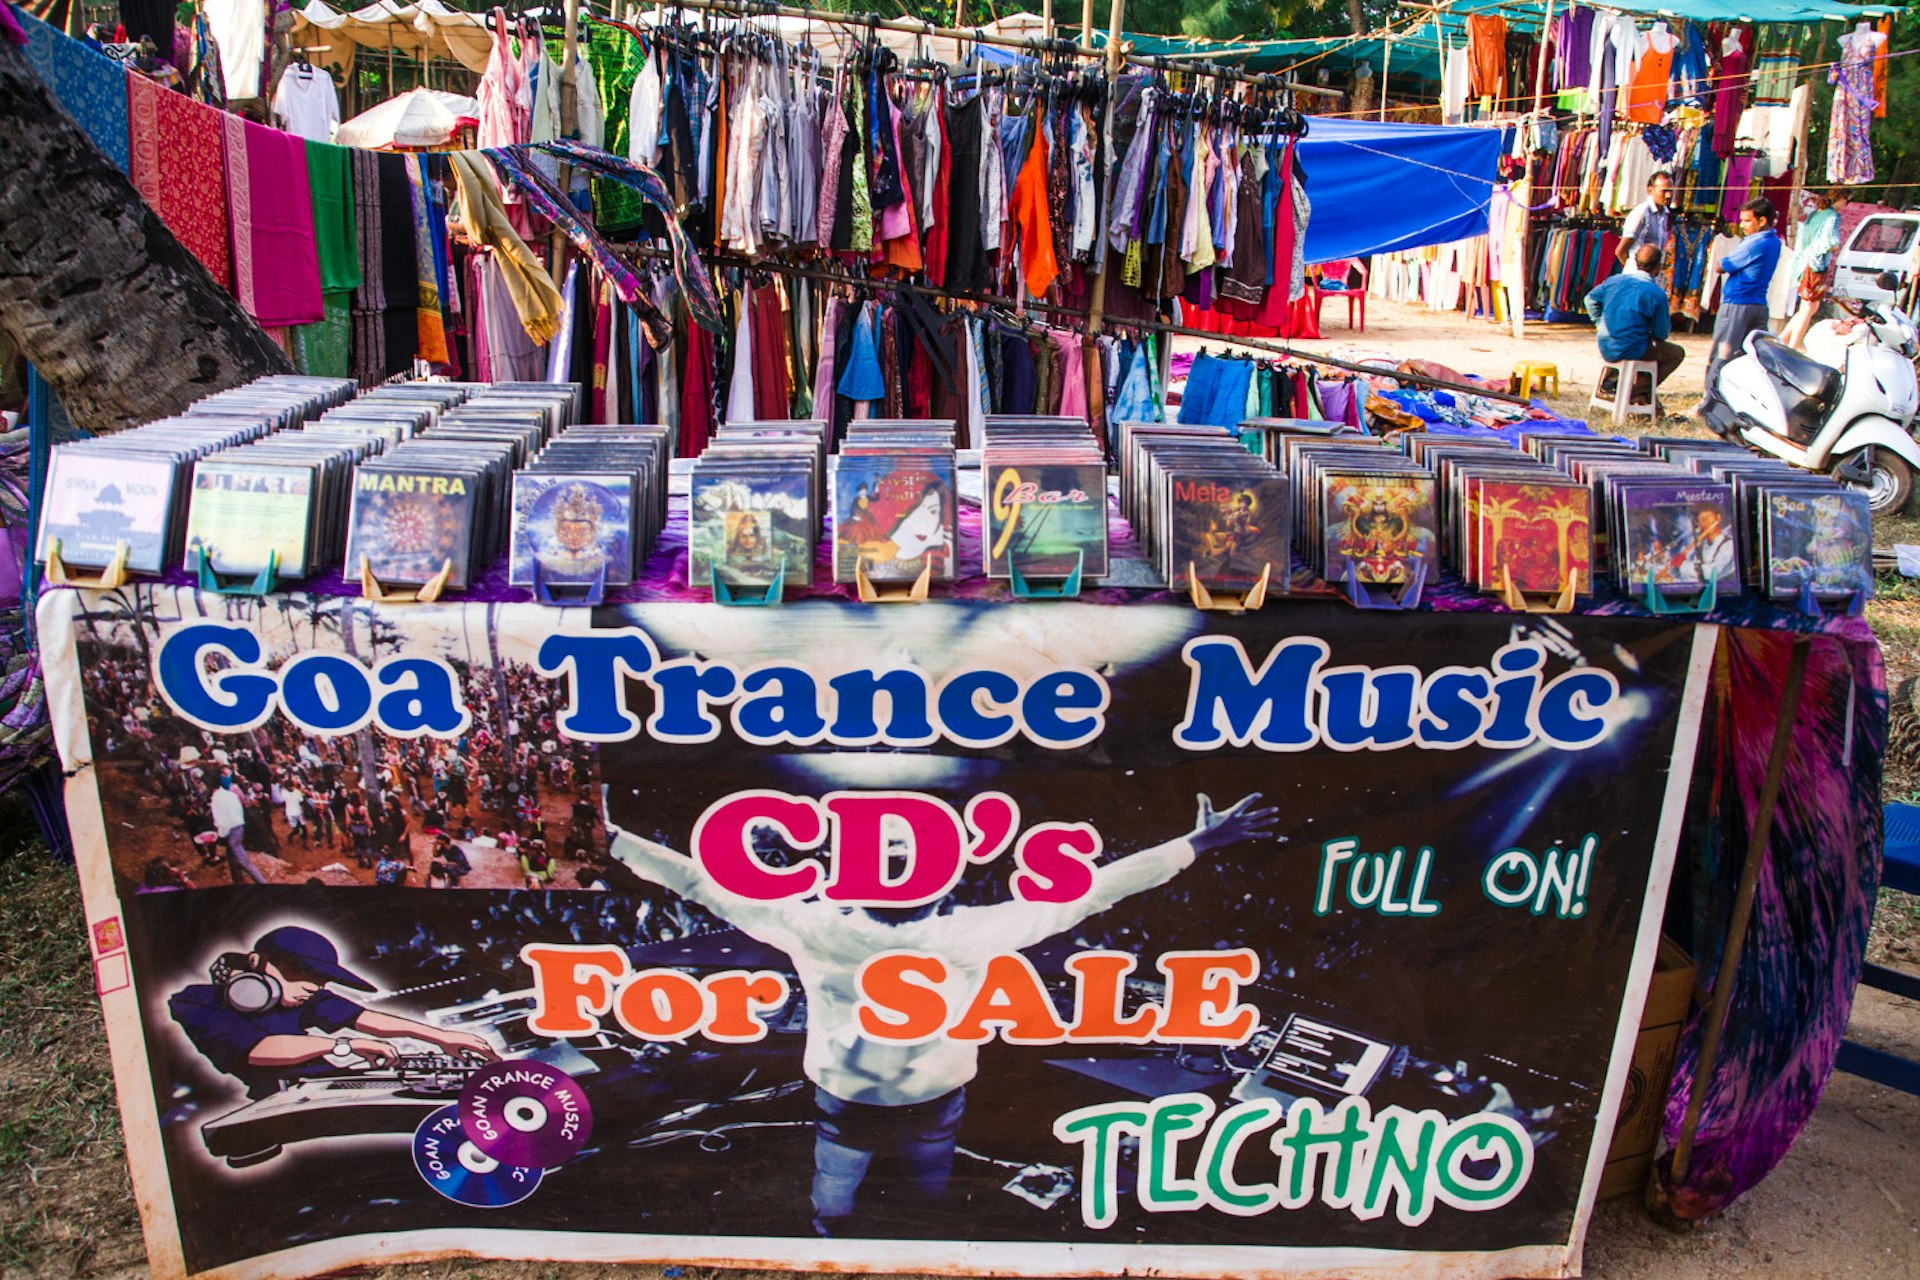 An array of trance CDs on sale at a market stall in Anjuna. The stall is a mishmash of psychedelic colours.